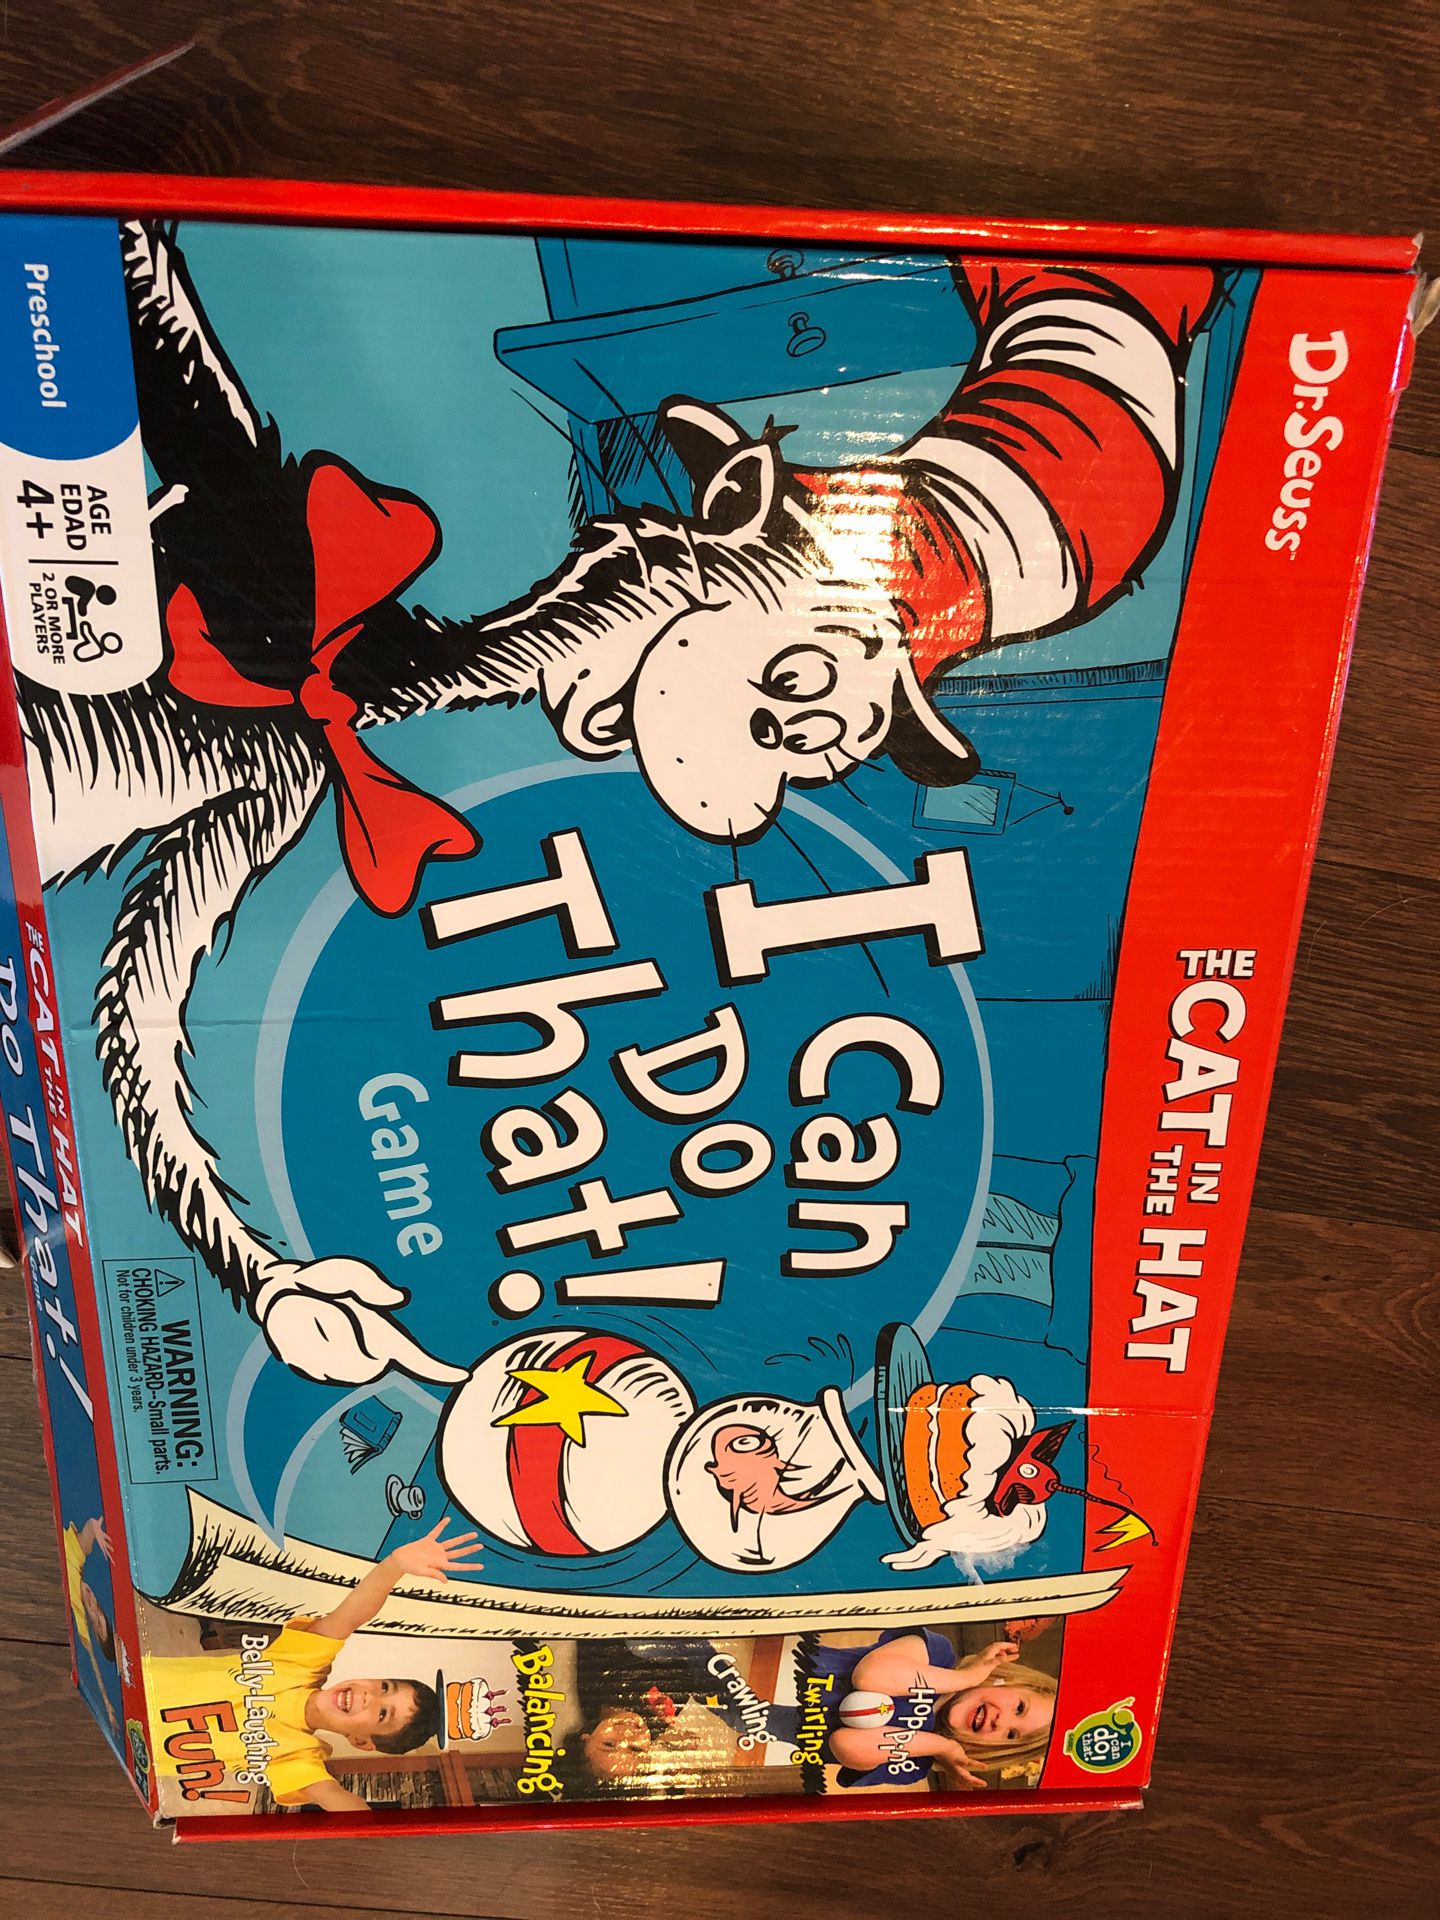 New Cat in the Hat game “I can do that” - preschool Dr Seuss week- homeschool, party game